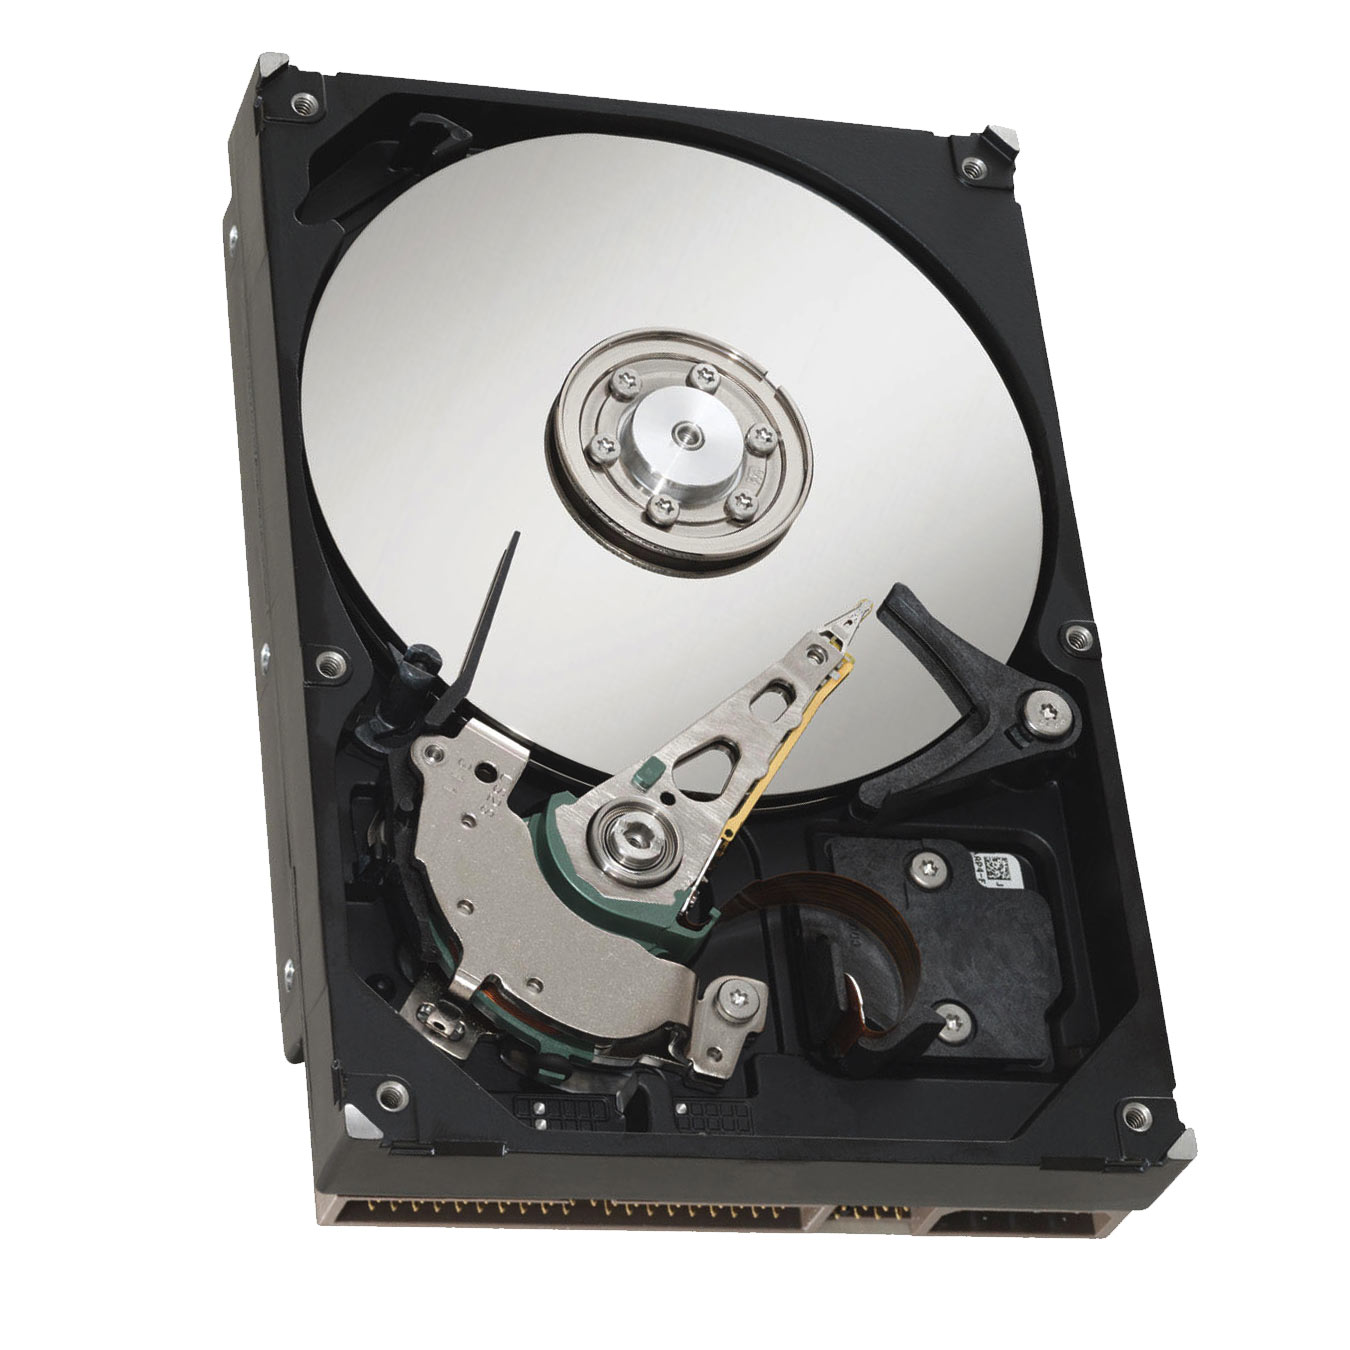 C3647-69750 | HP 2.1GB 7200RPM SCSI Fast Wide Differential High Performance 3.5-inch Hard Drive